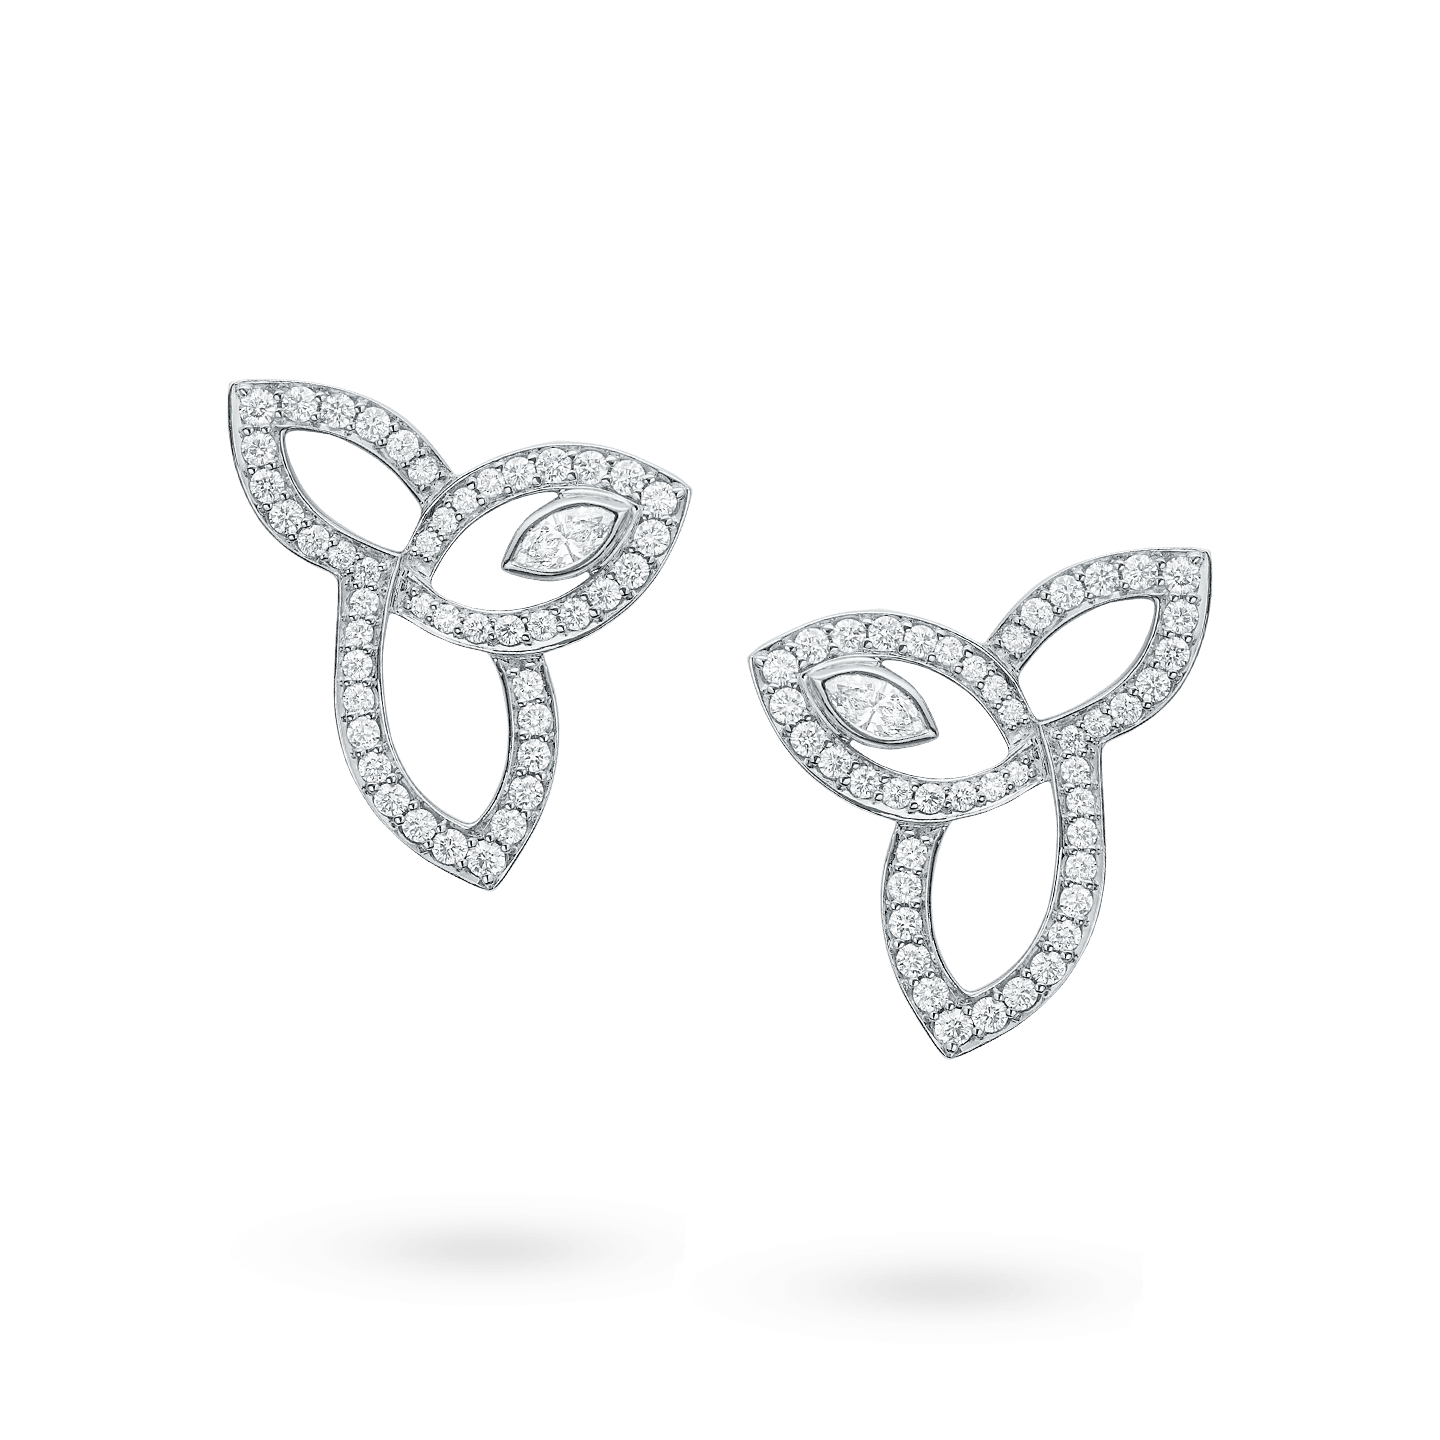 Lily Cluster Diamond Earrings in Platinum, Product Image 1